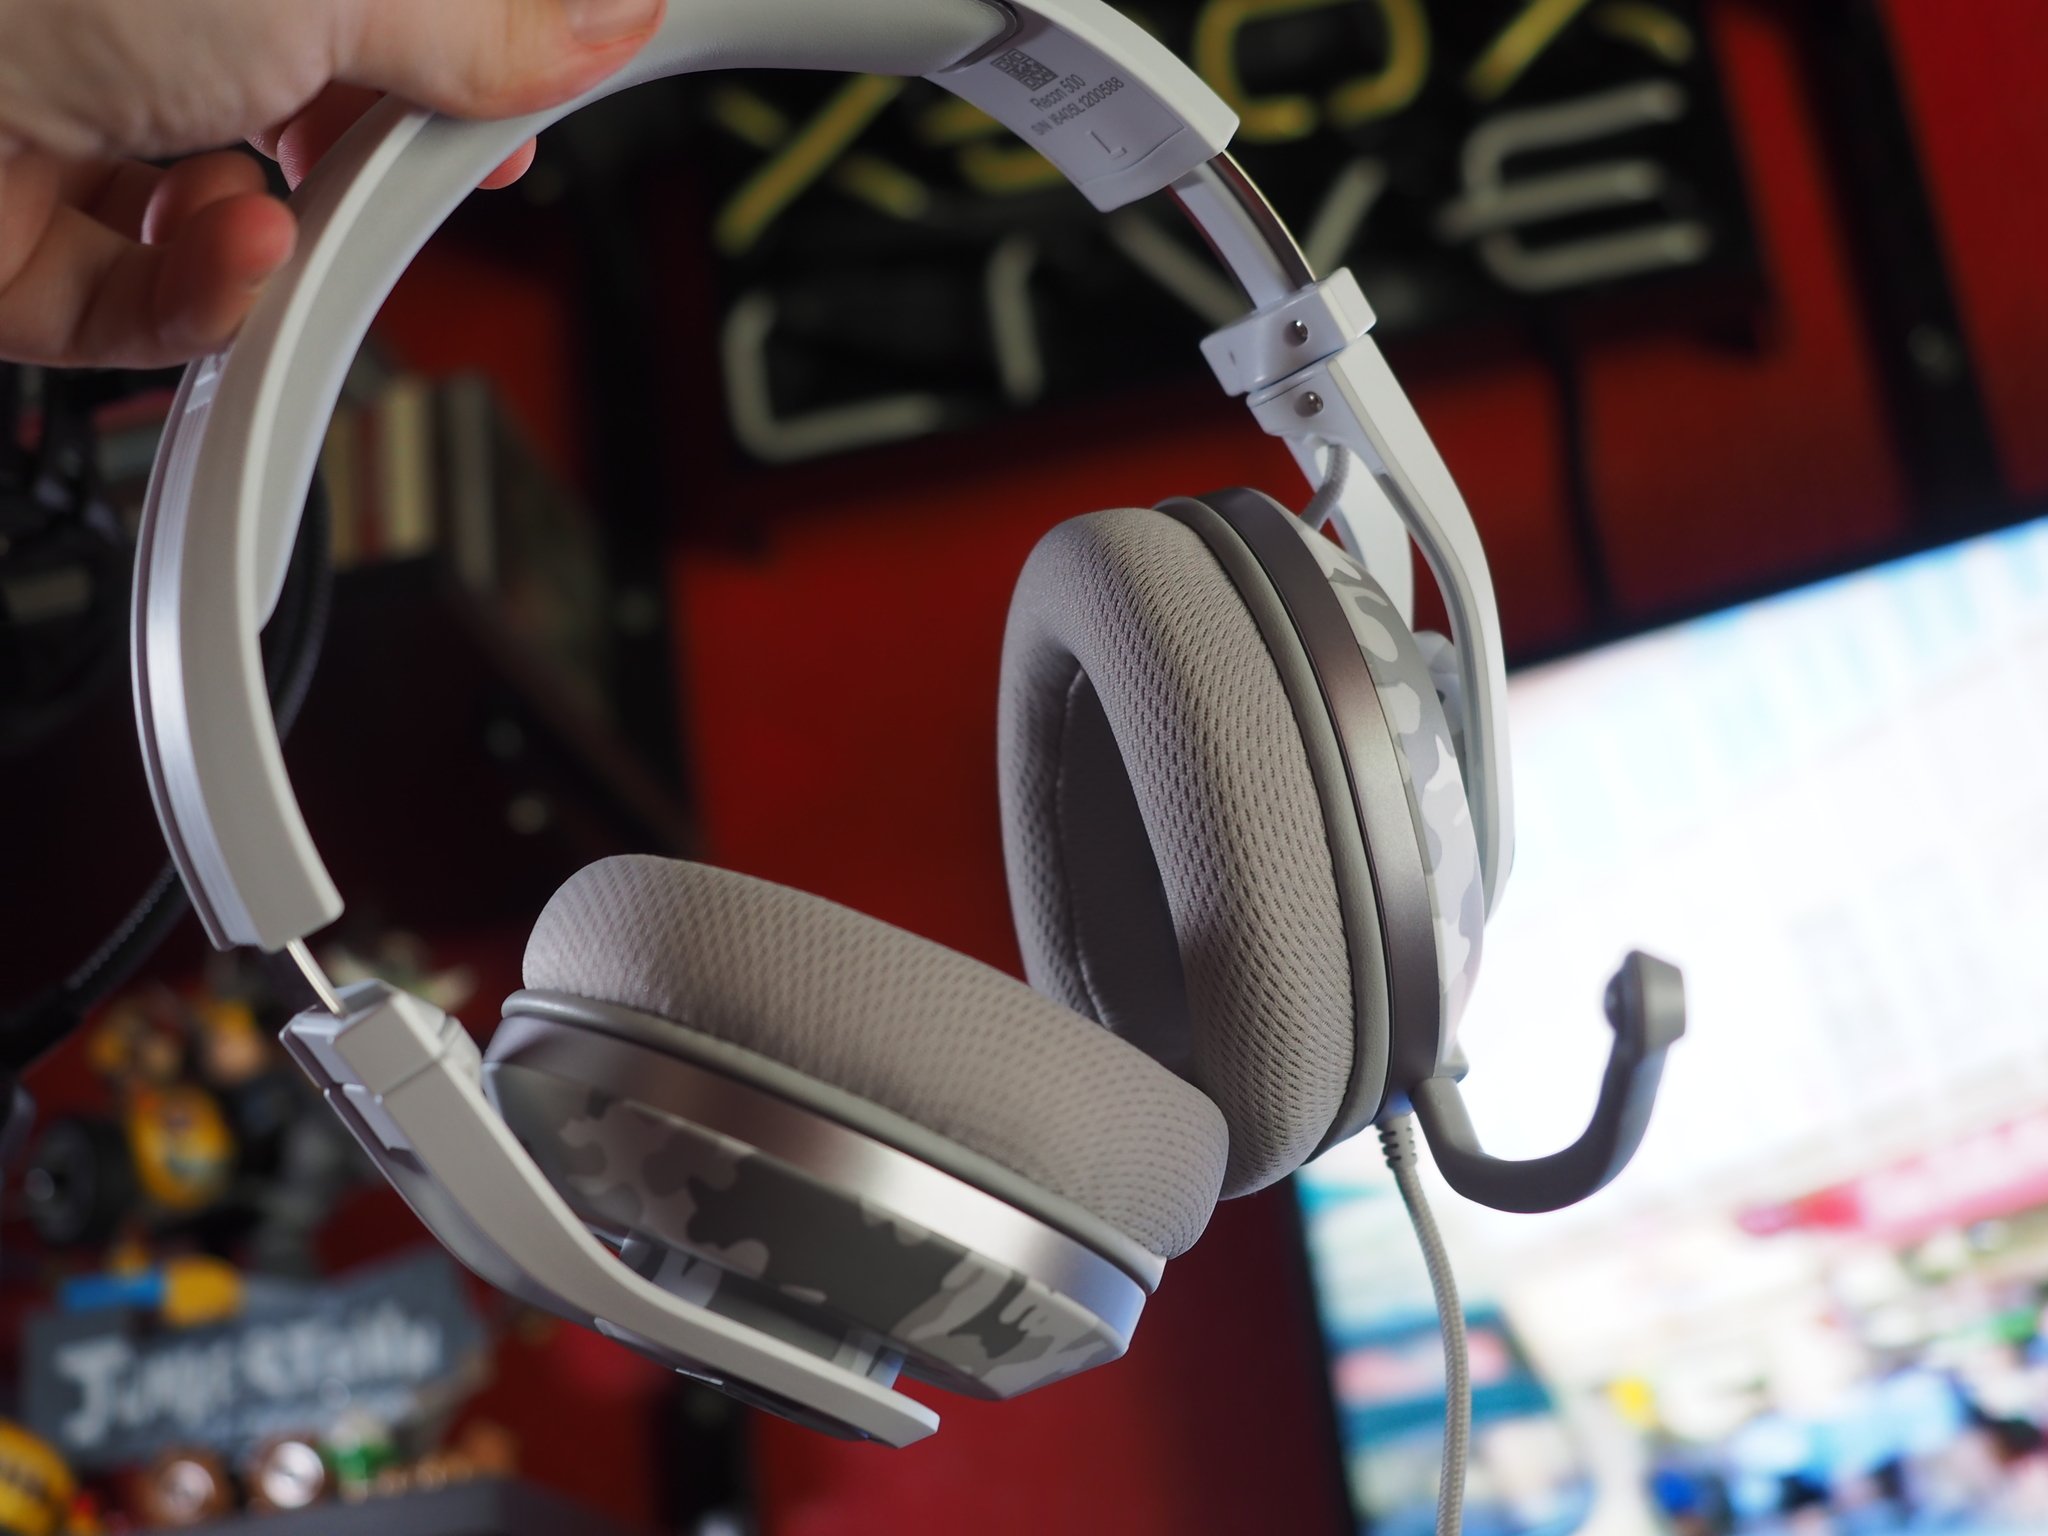 Turtle Beach Recon 500 2021 Review